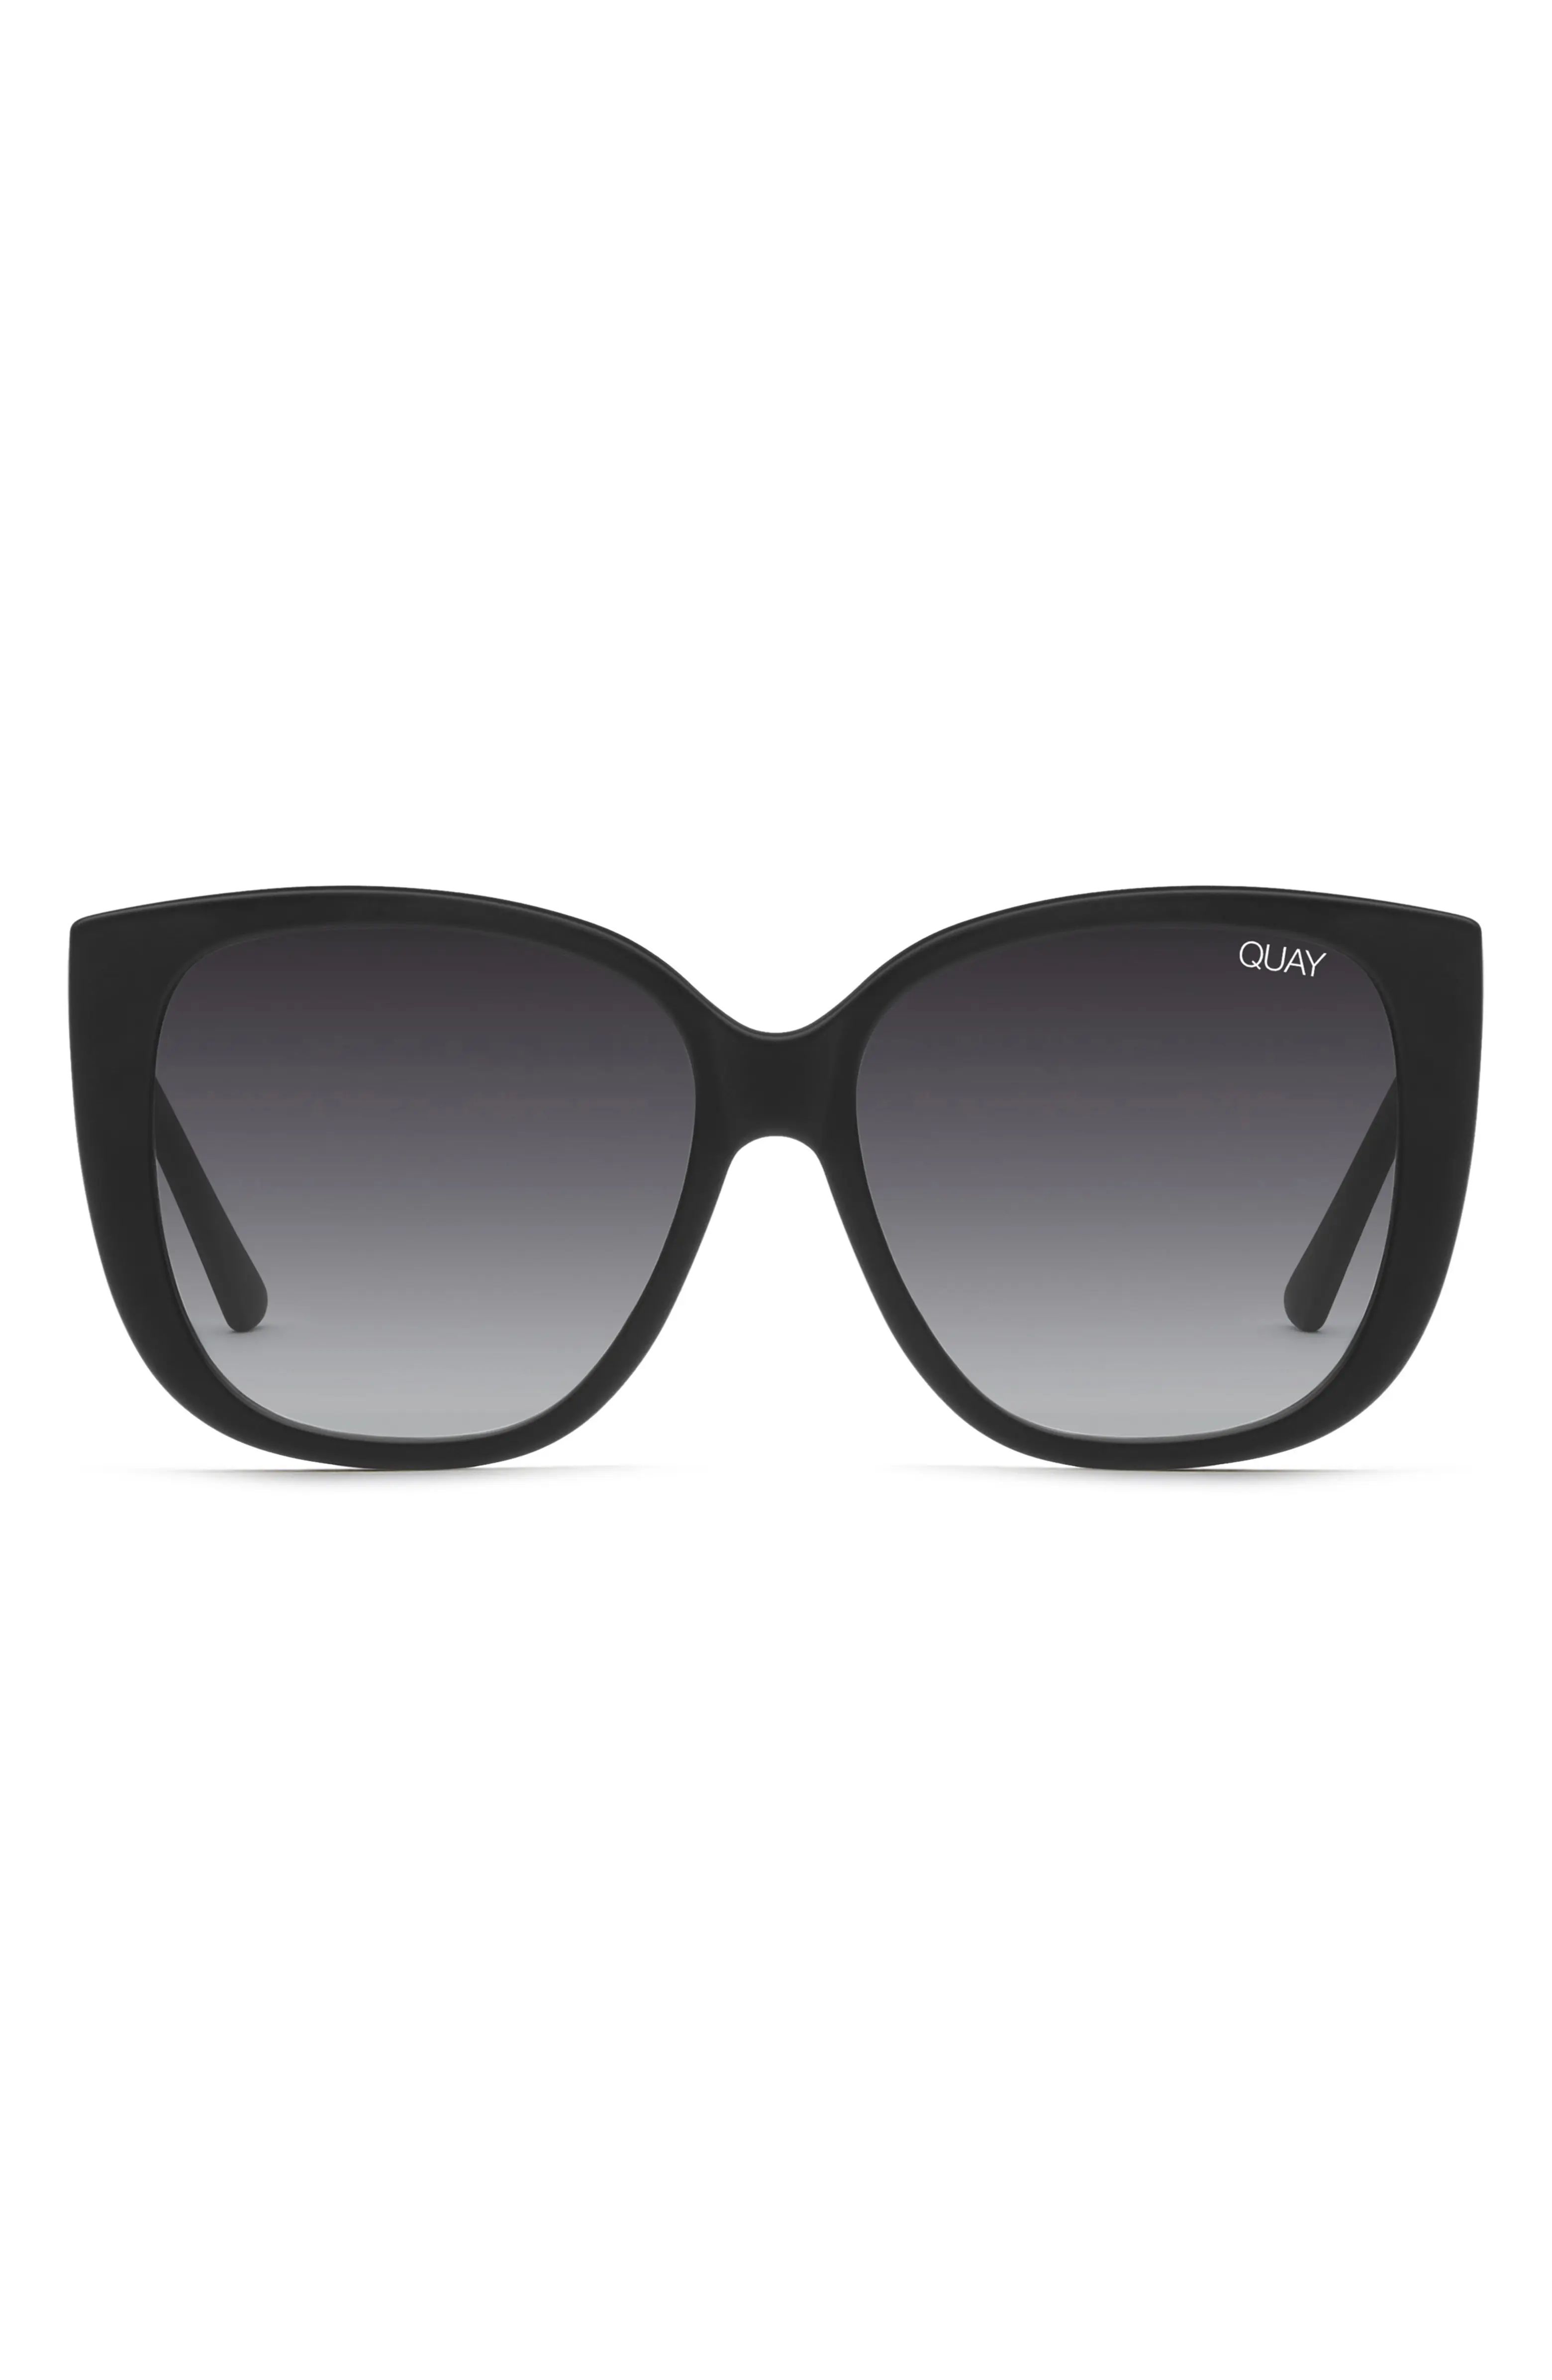 Ever After 59mm Cat Eye Sunglasses | Nordstrom